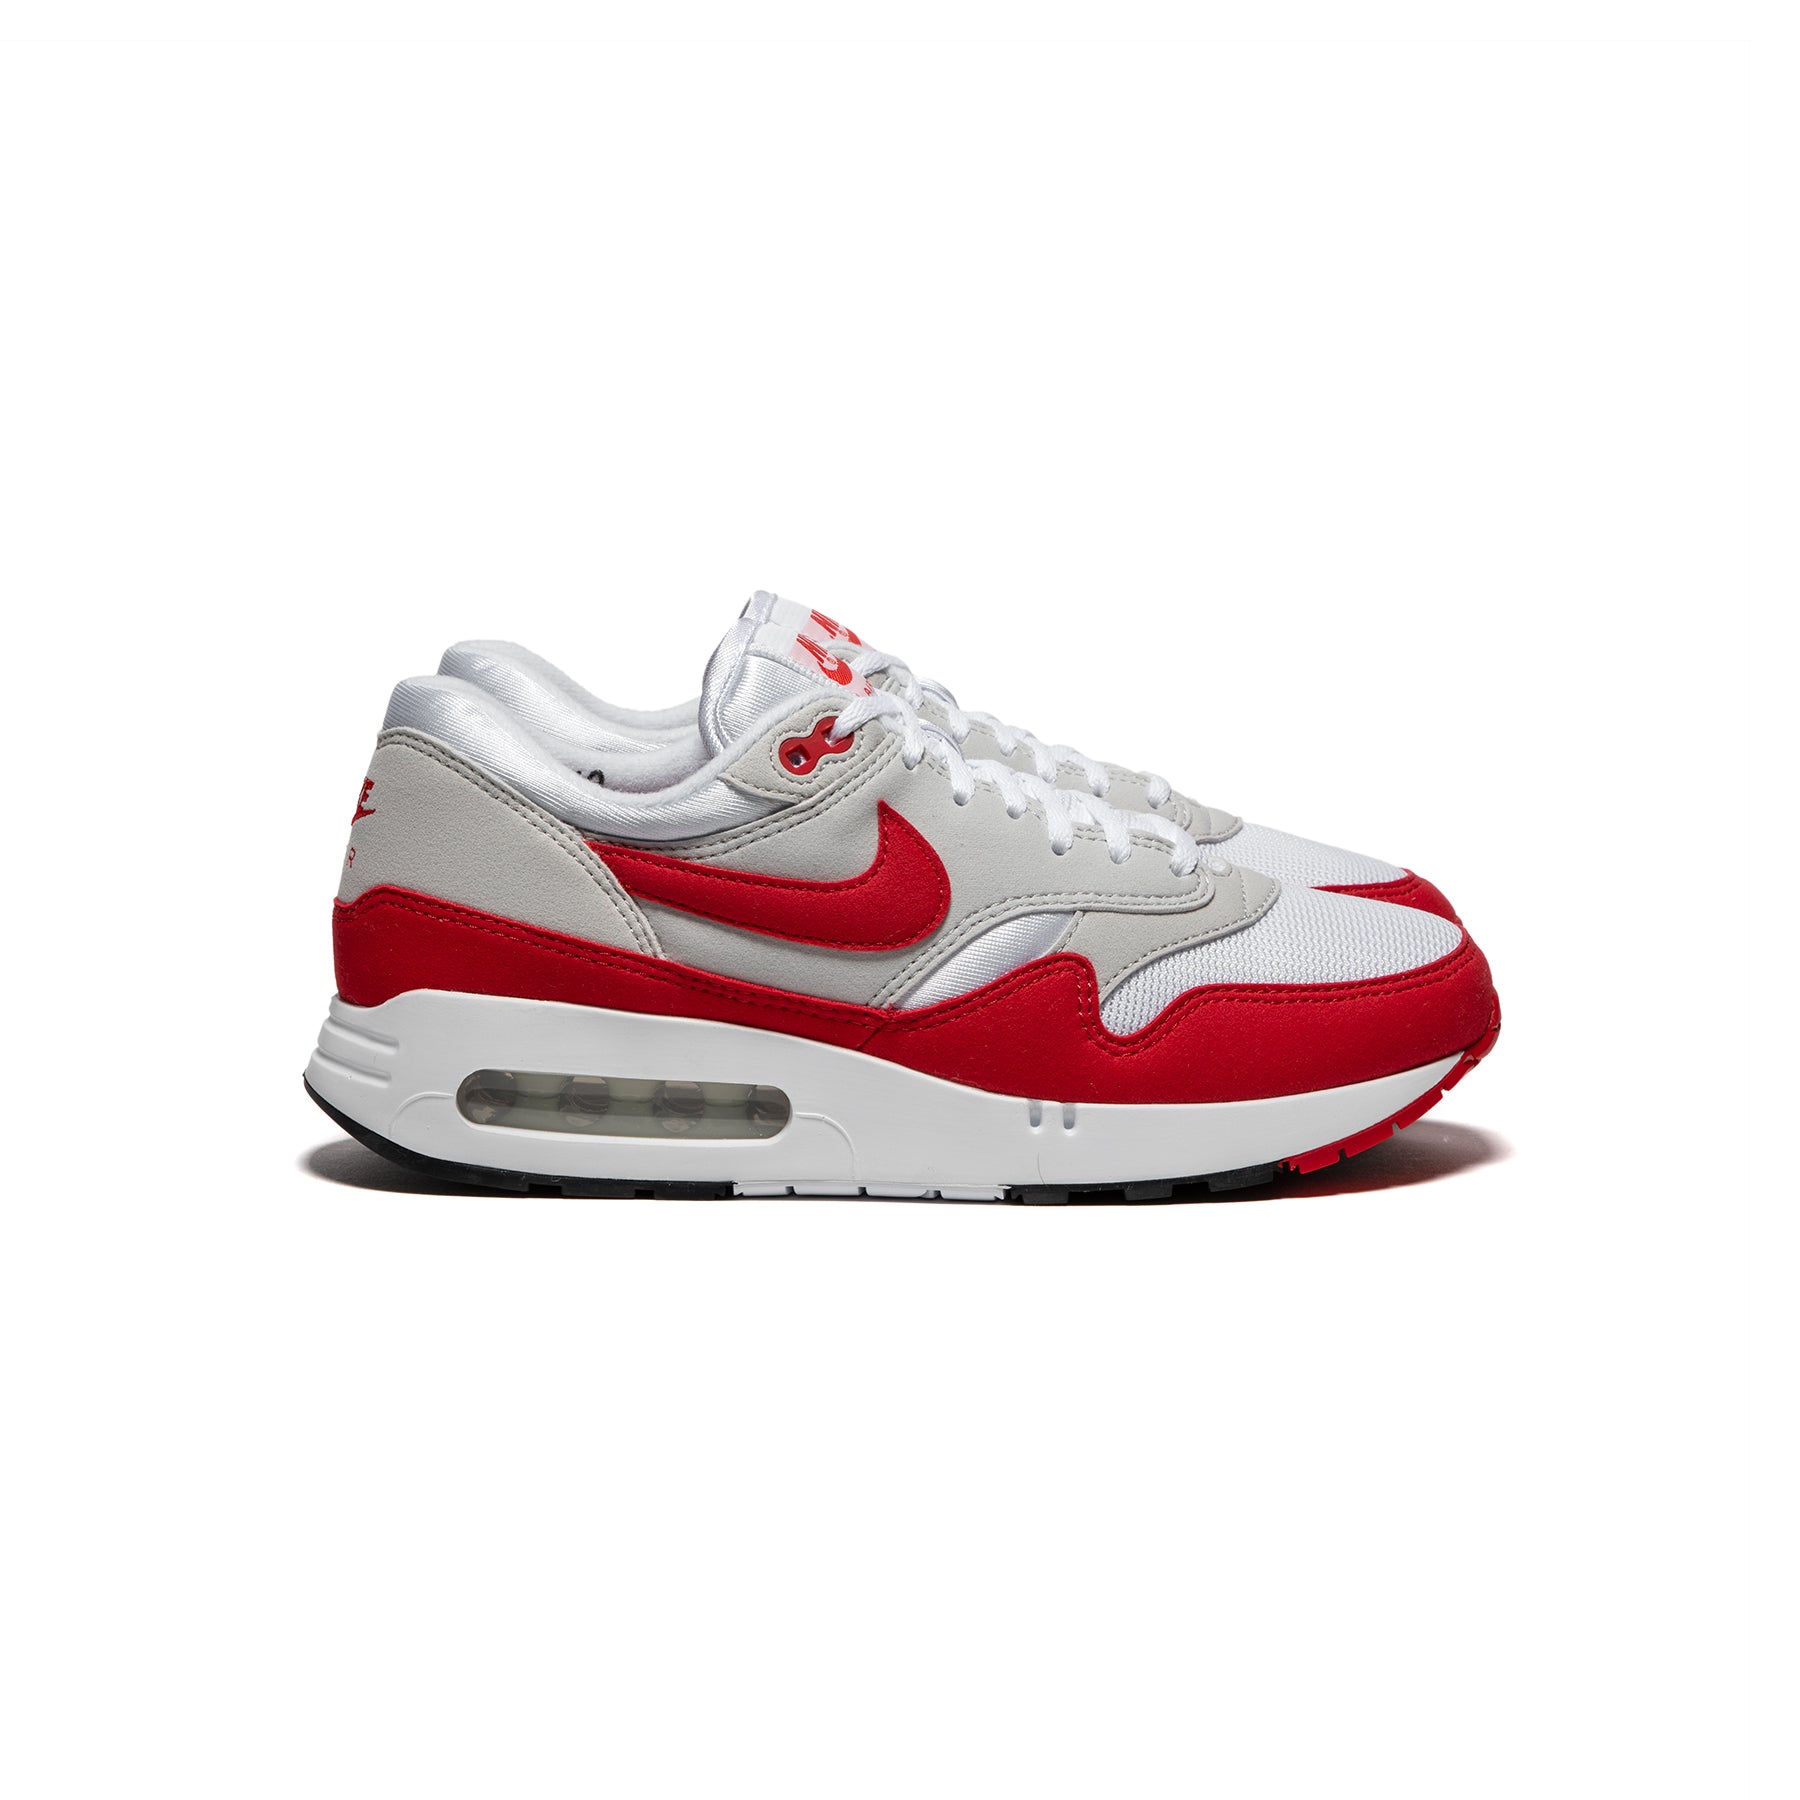 Mobiliseren antwoord test Nike Air Max 1 '86 Premium (White/University Red/Light Neutral Grey) –  Concepts